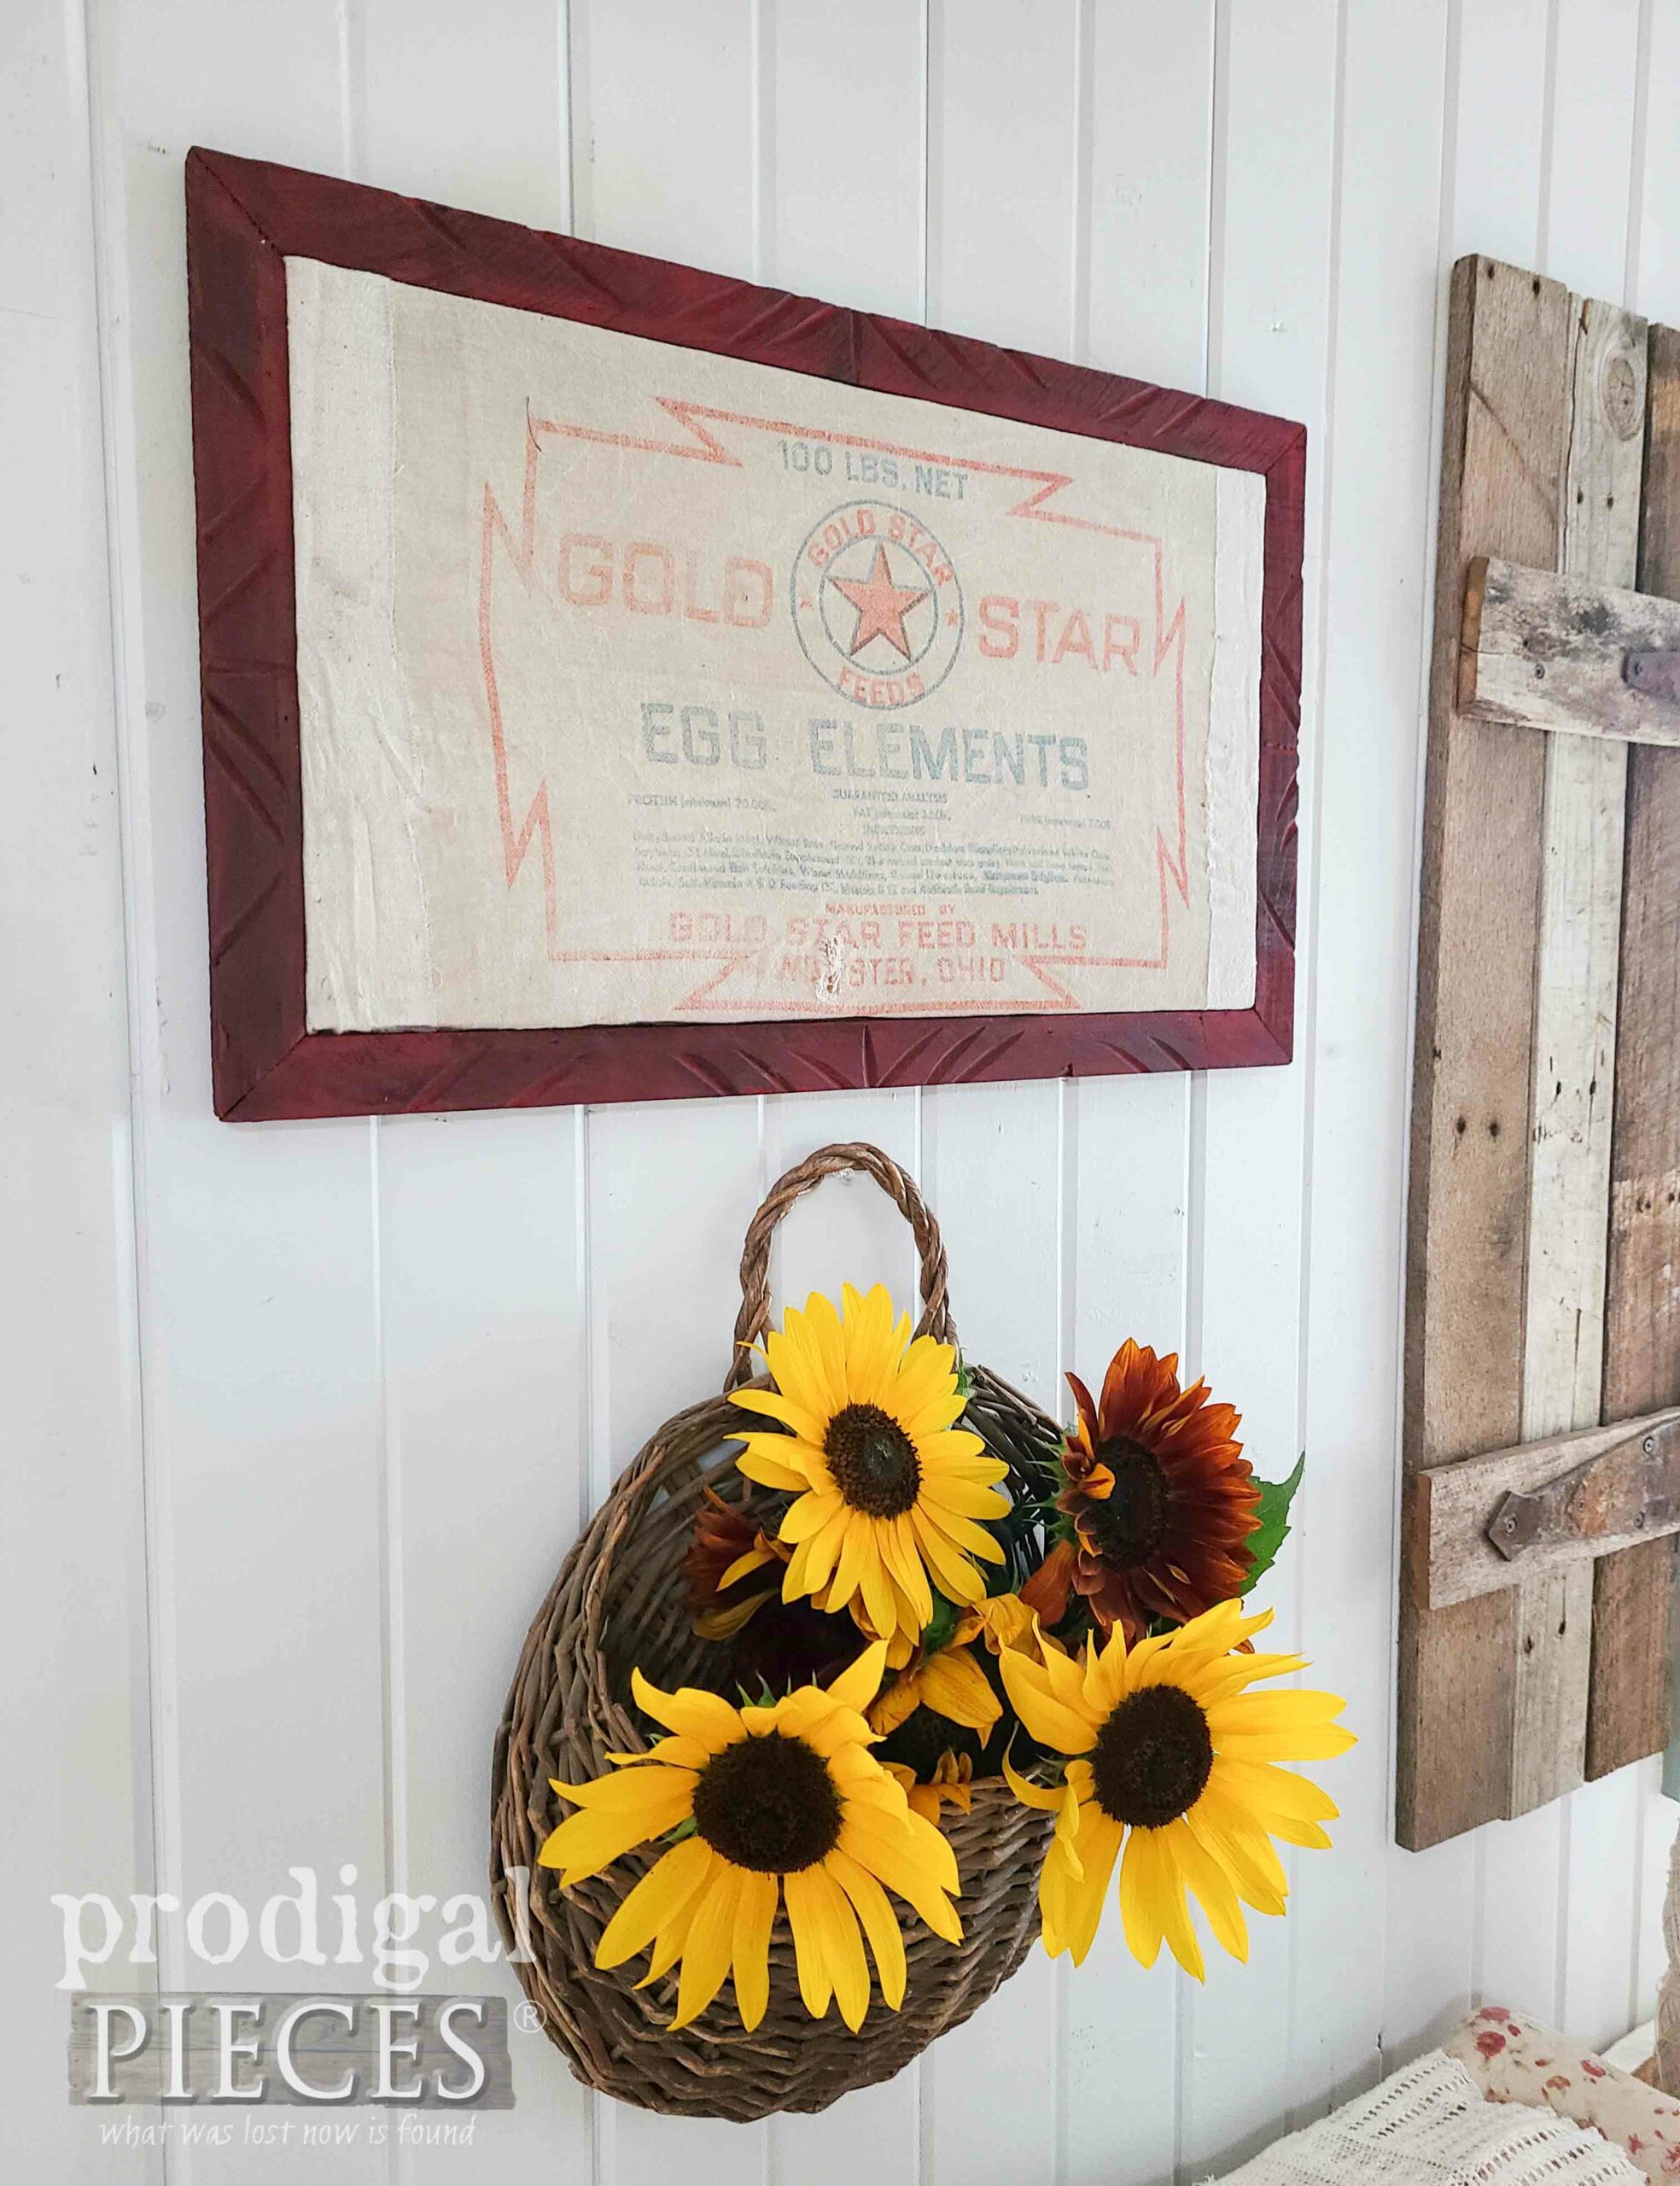 Right Side Feed Sack Art in Thrifted Frame by Larissa of Prodigal Pieces | prodigalpieces.com #prodigalpieces #farmhouse #feedsack #diy